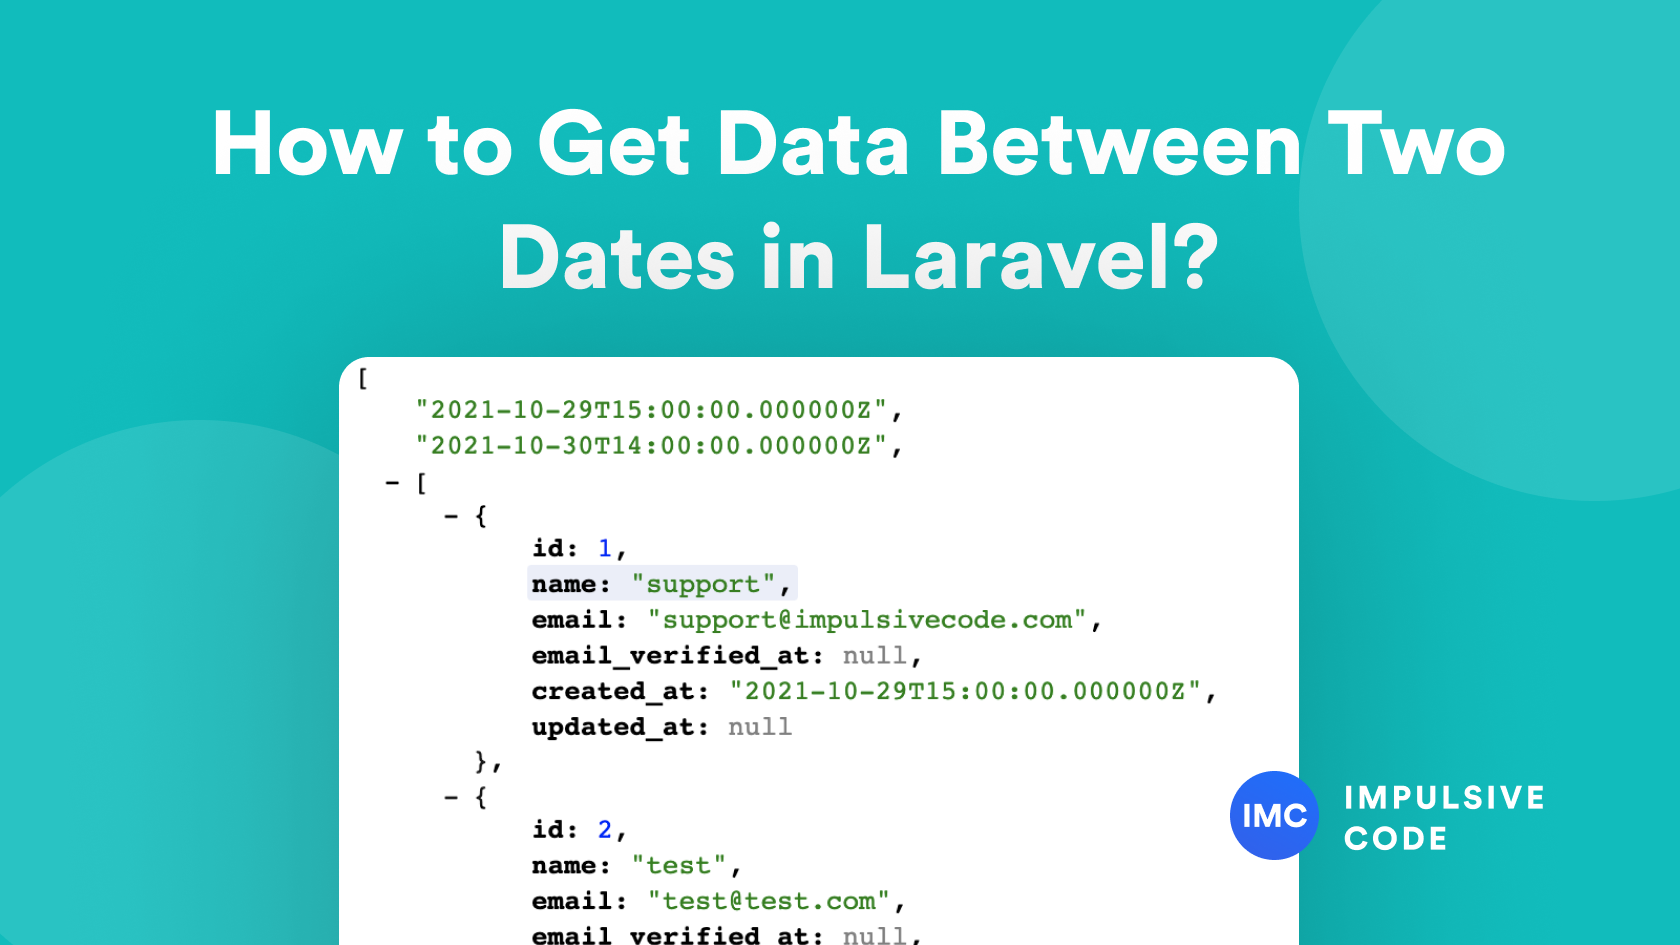 How to Get Data Between Two Dates in Laravel?